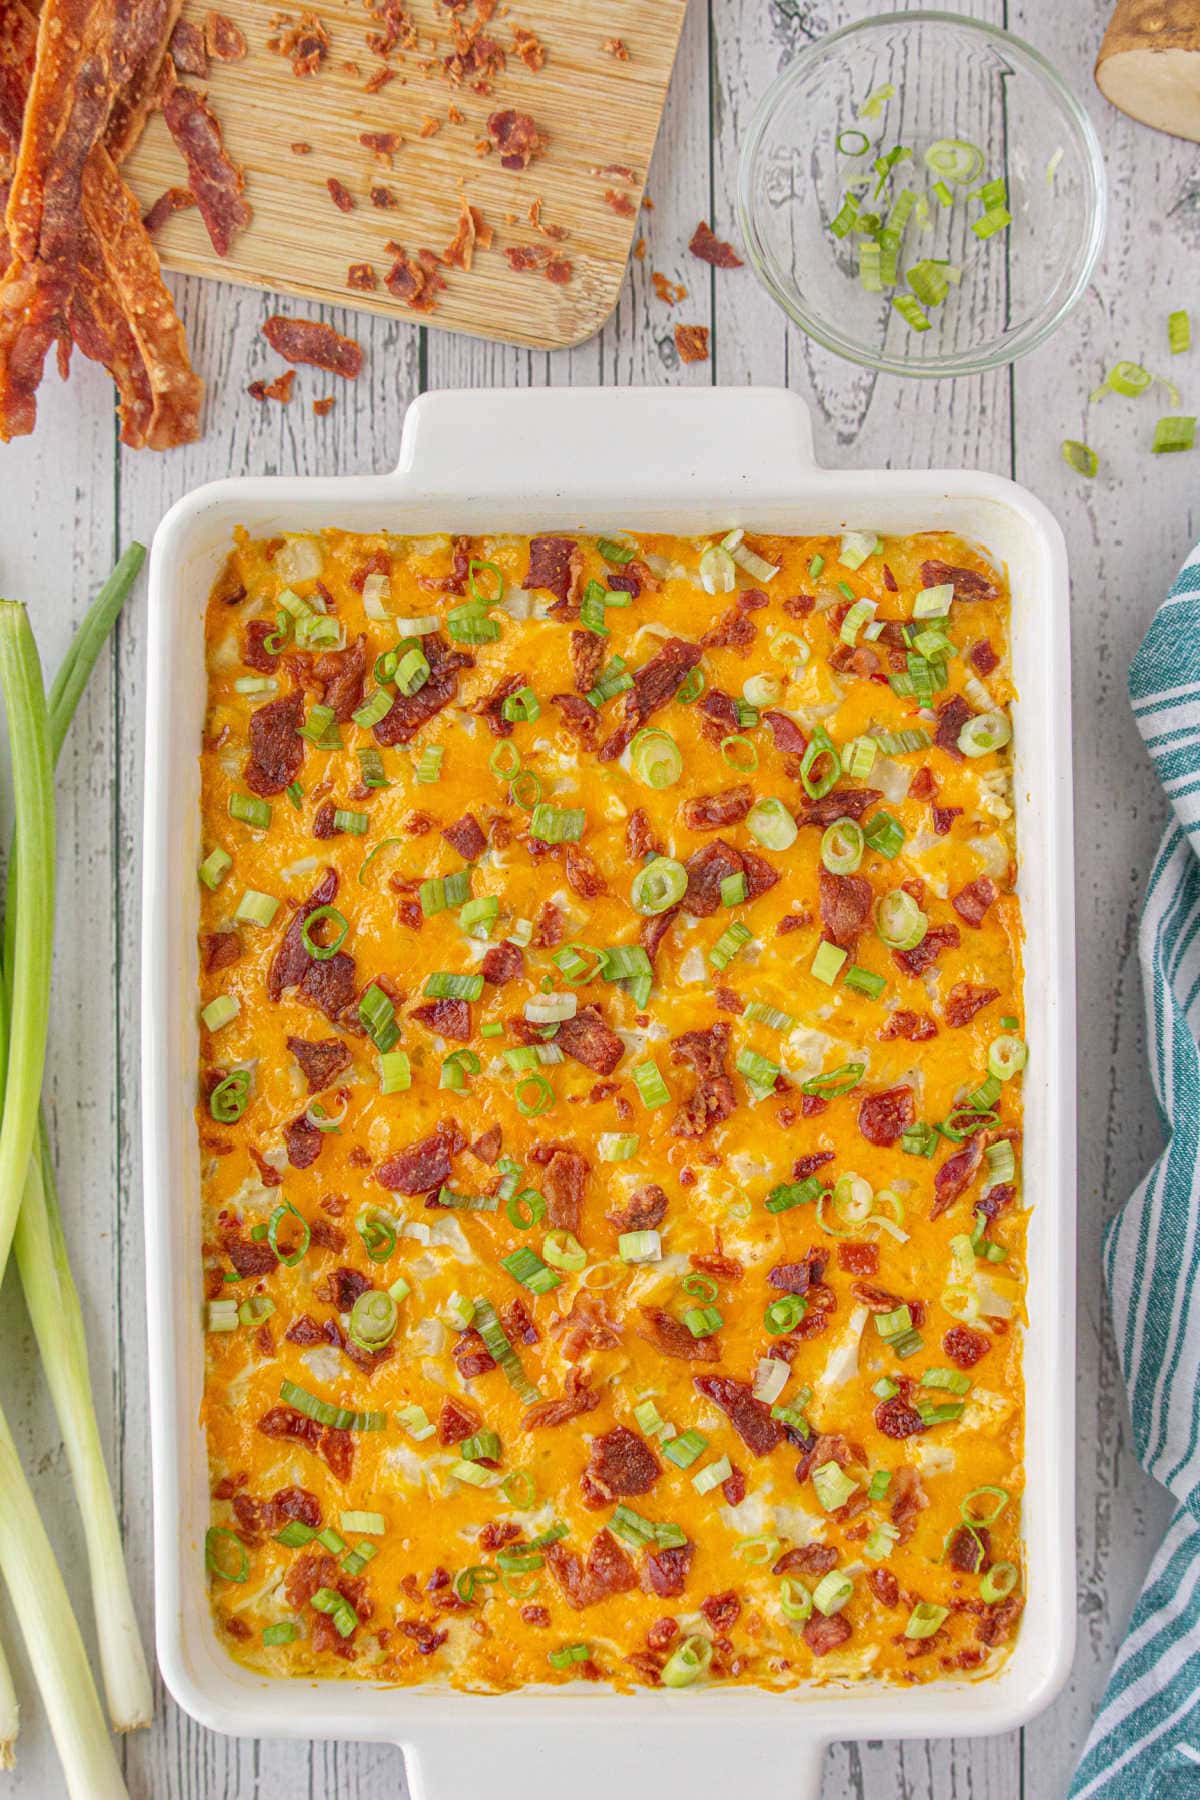 Overhead view of the bacon chicken casserole with gooey cheese topping.